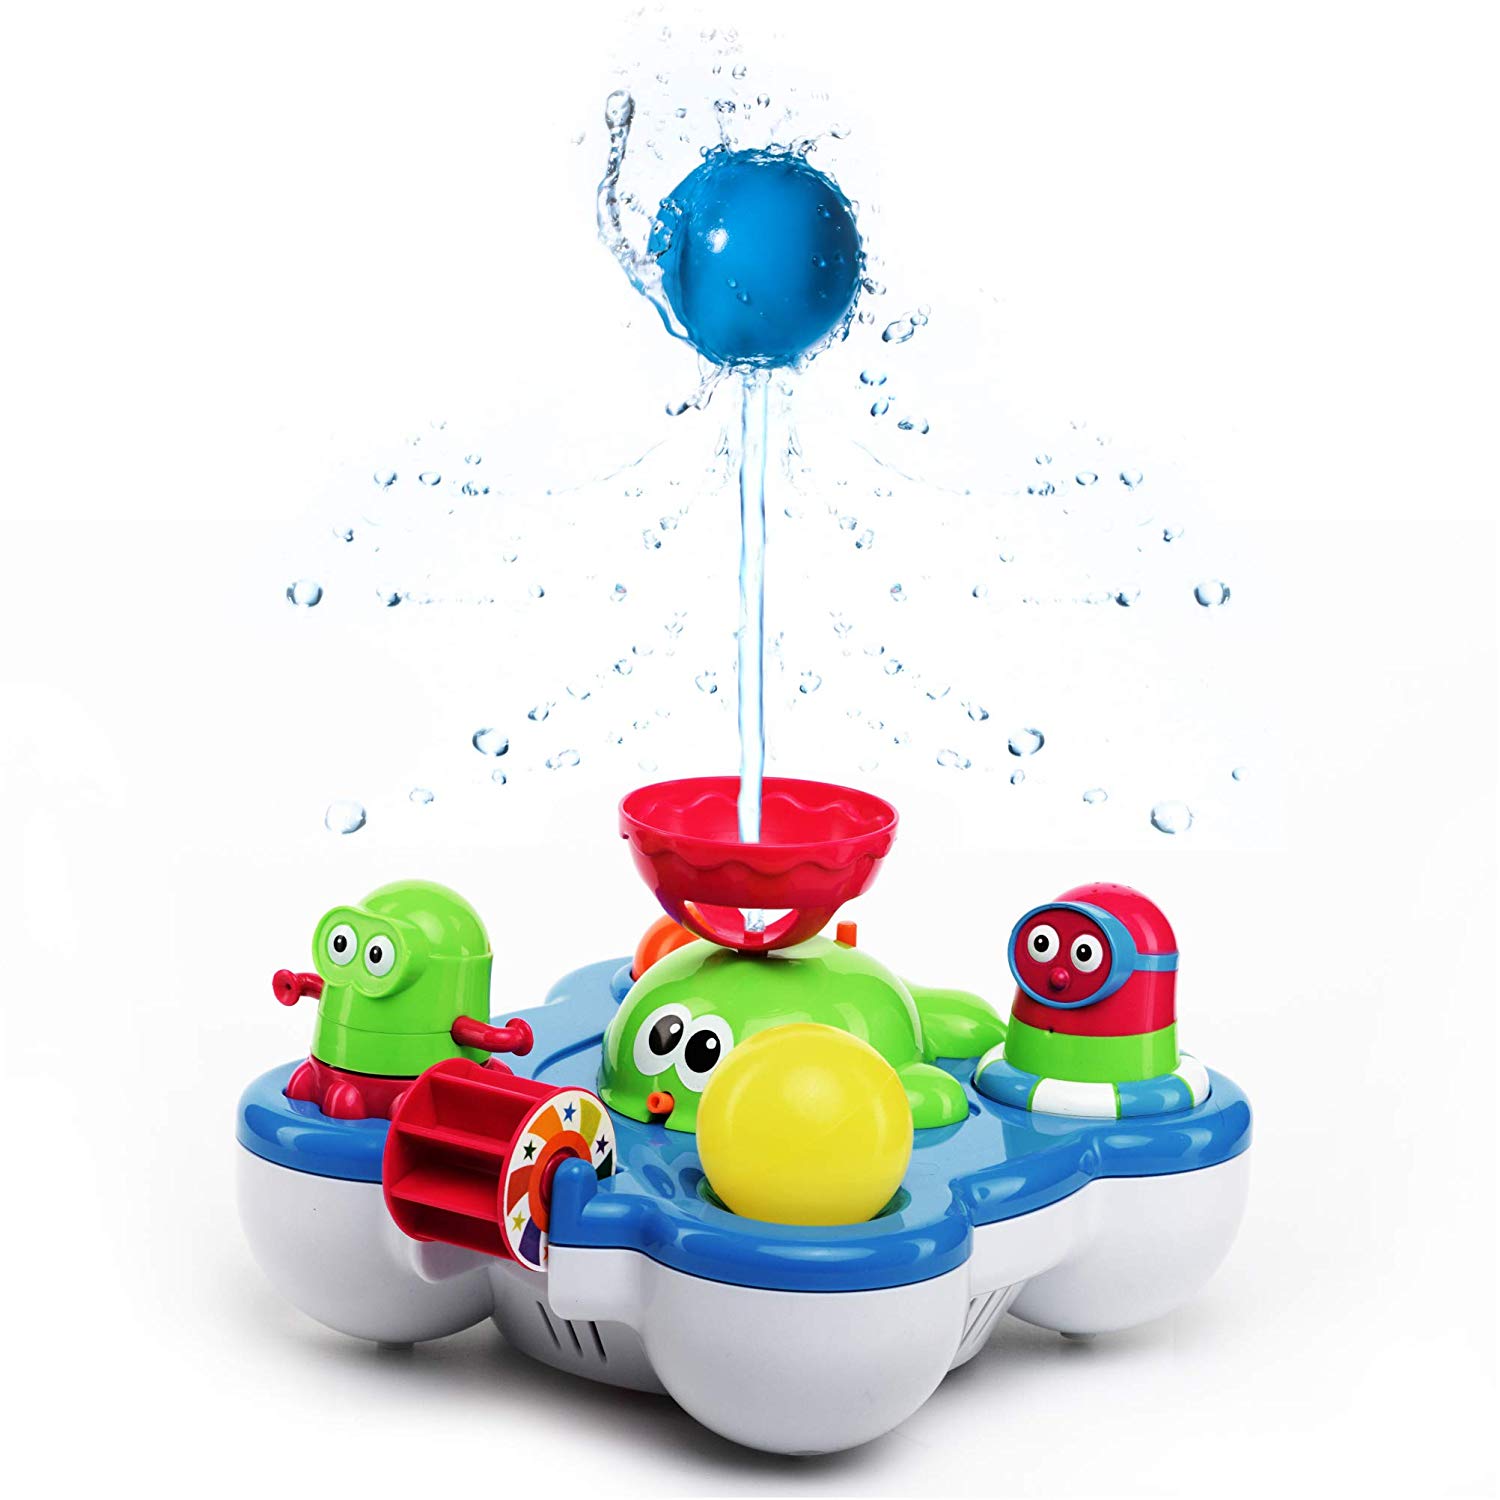 best rated bath toys